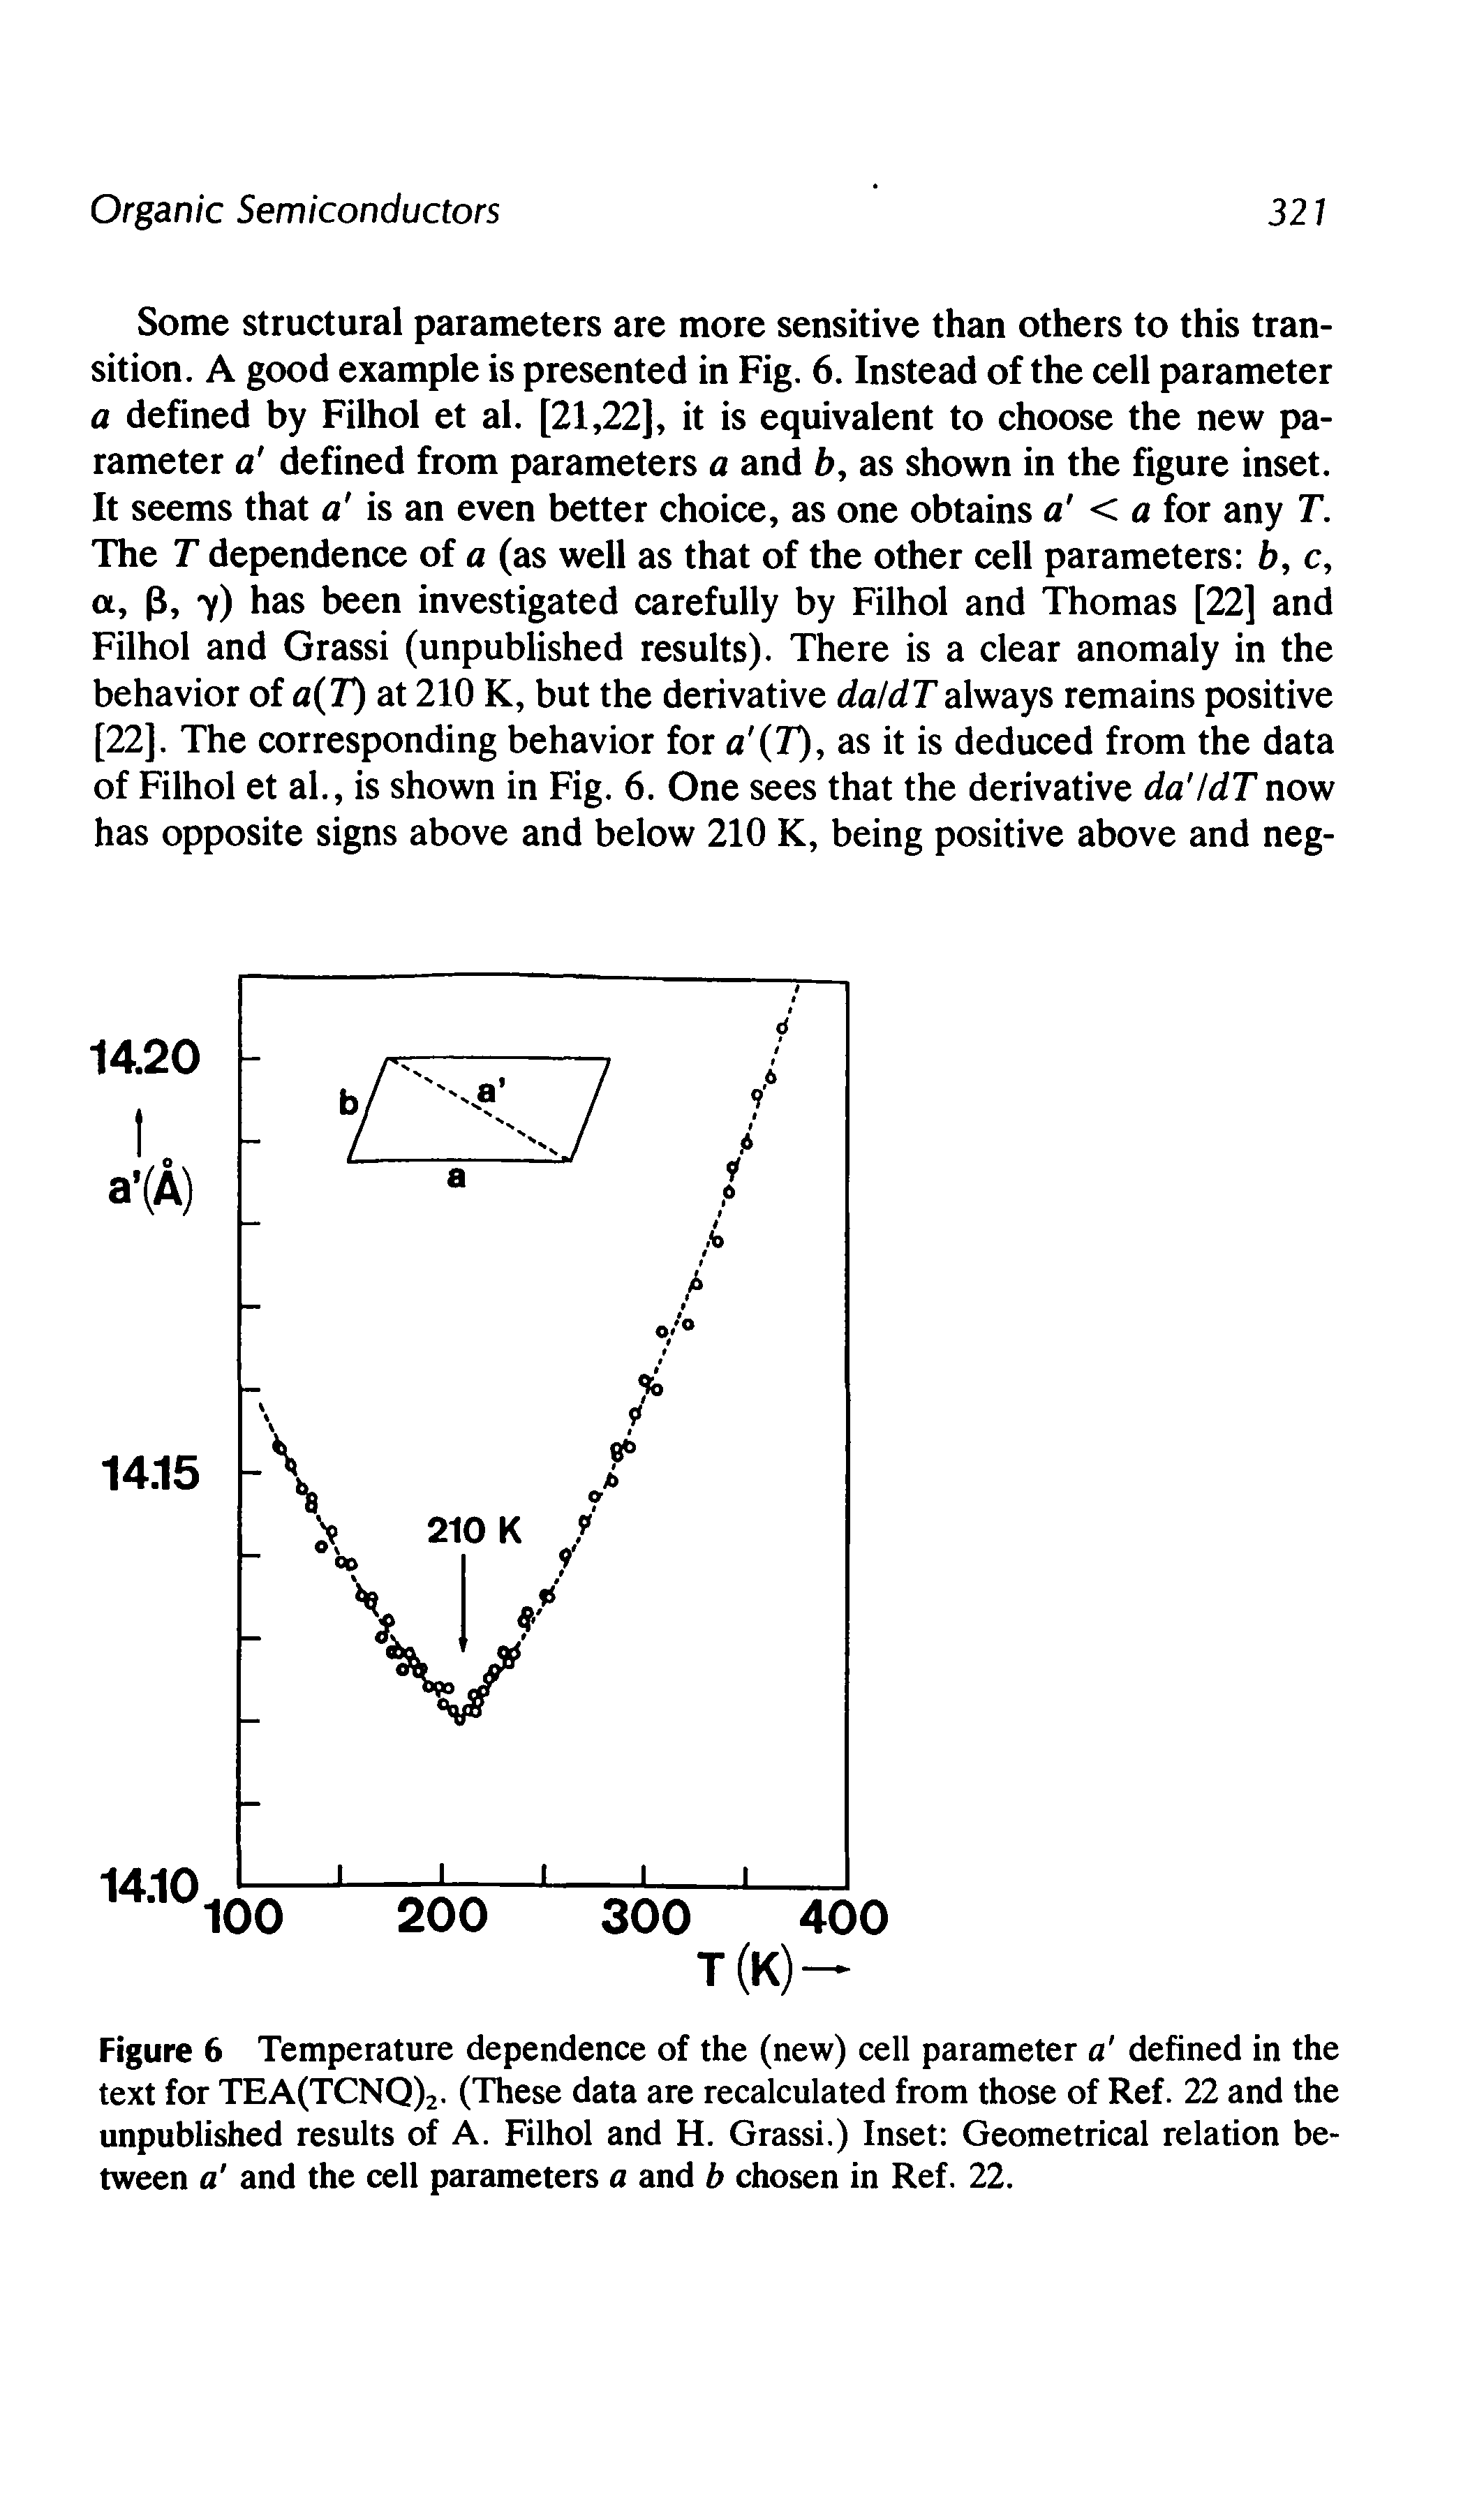 Figure 6 Temperature dependence of the (new) cell parameter a defined in the text for TEA(TCNQ)2. (These data are recalculated from those of Ref. 22 and the unpublished results of A. Filhol and H. Grassi.) Inset Geometrical relation between a and the cell parameters a and b chosen in Ref. 22.